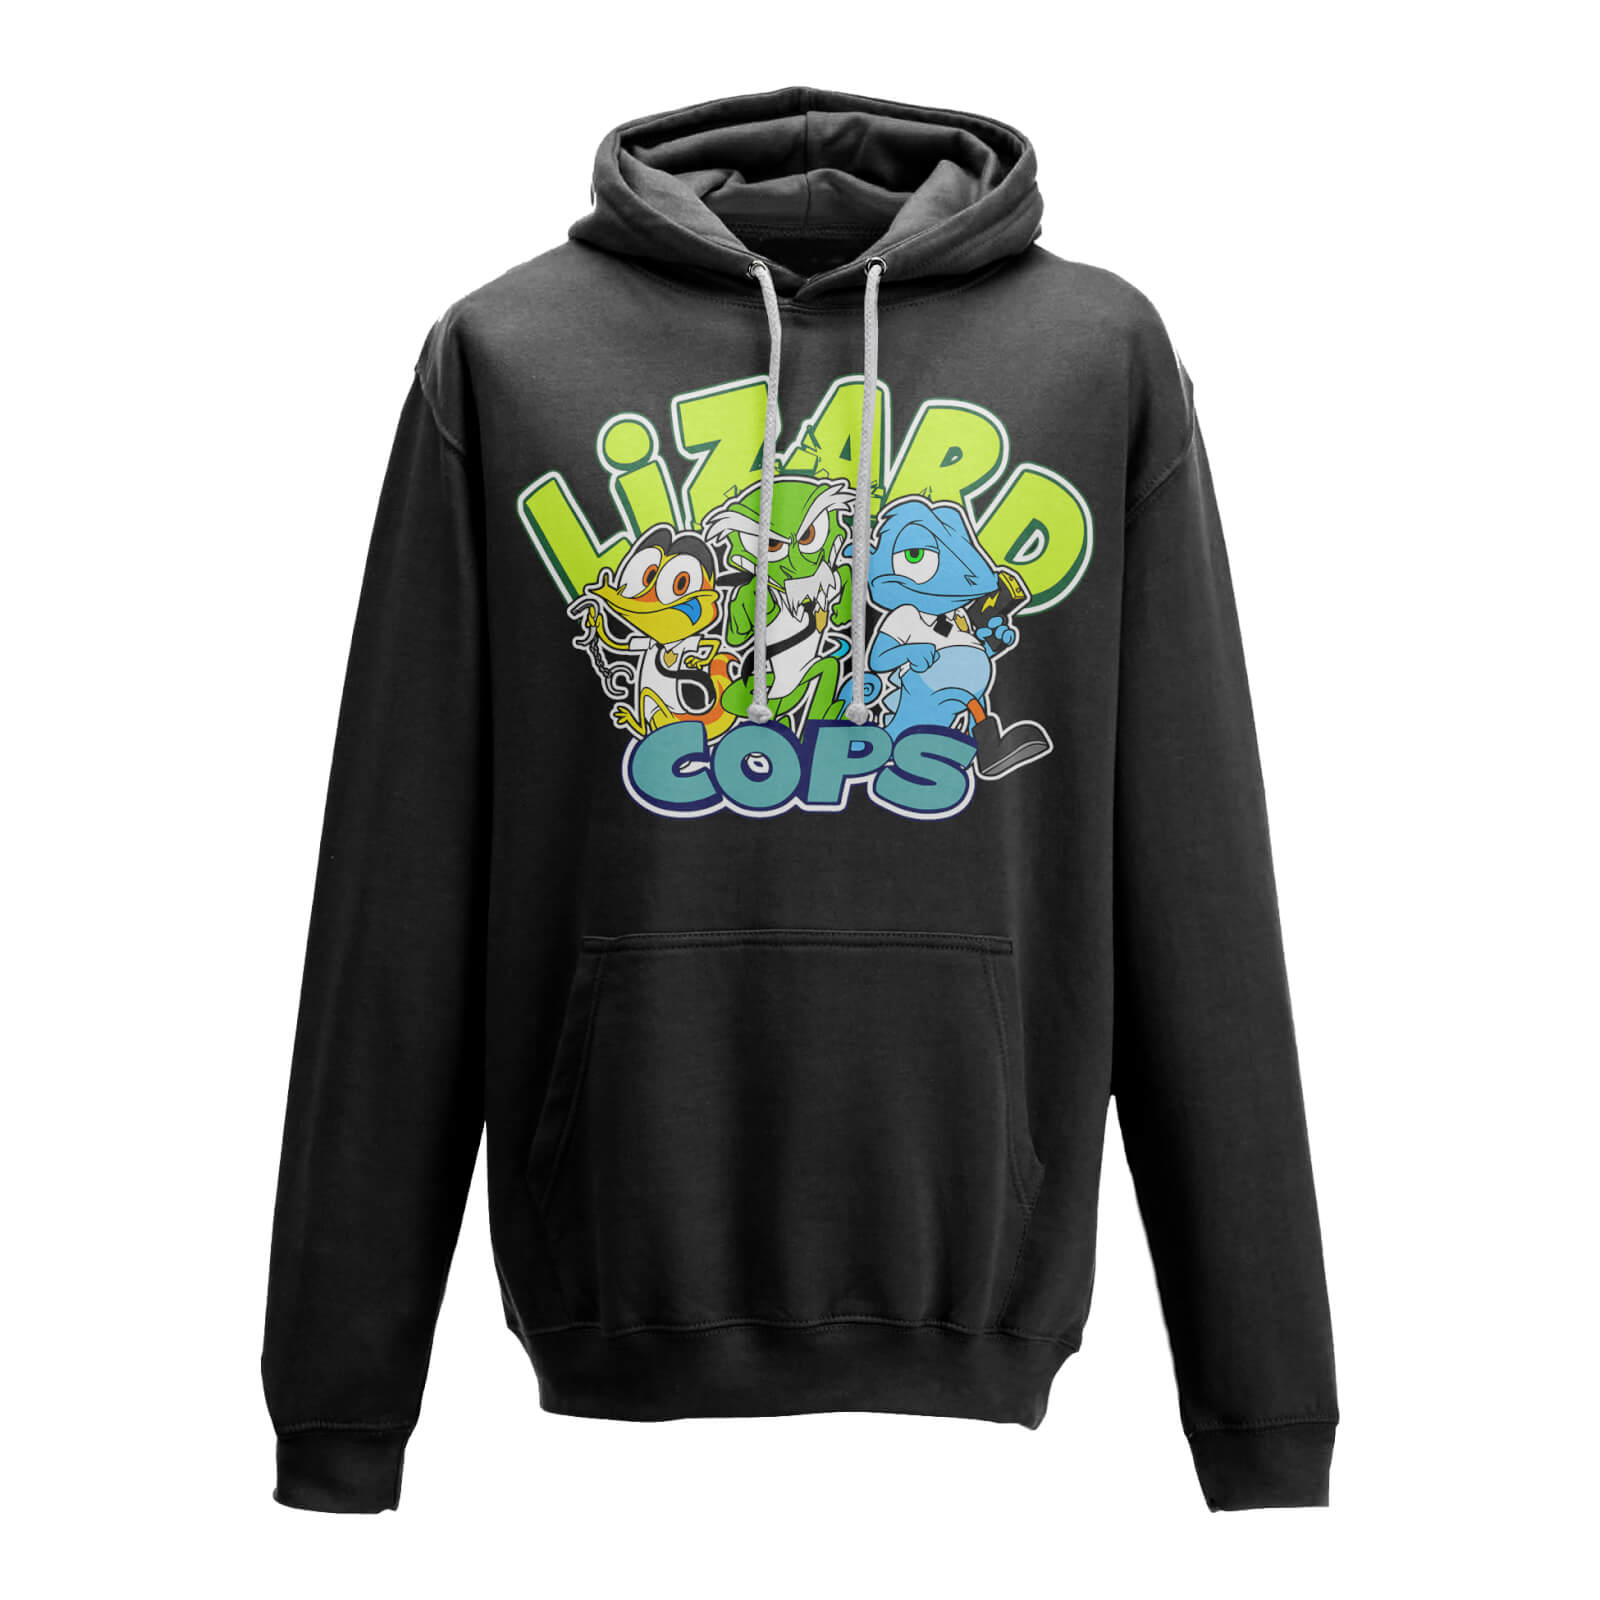 Click to view product details and reviews for Lizard Cops Hoodie Black Xxl.